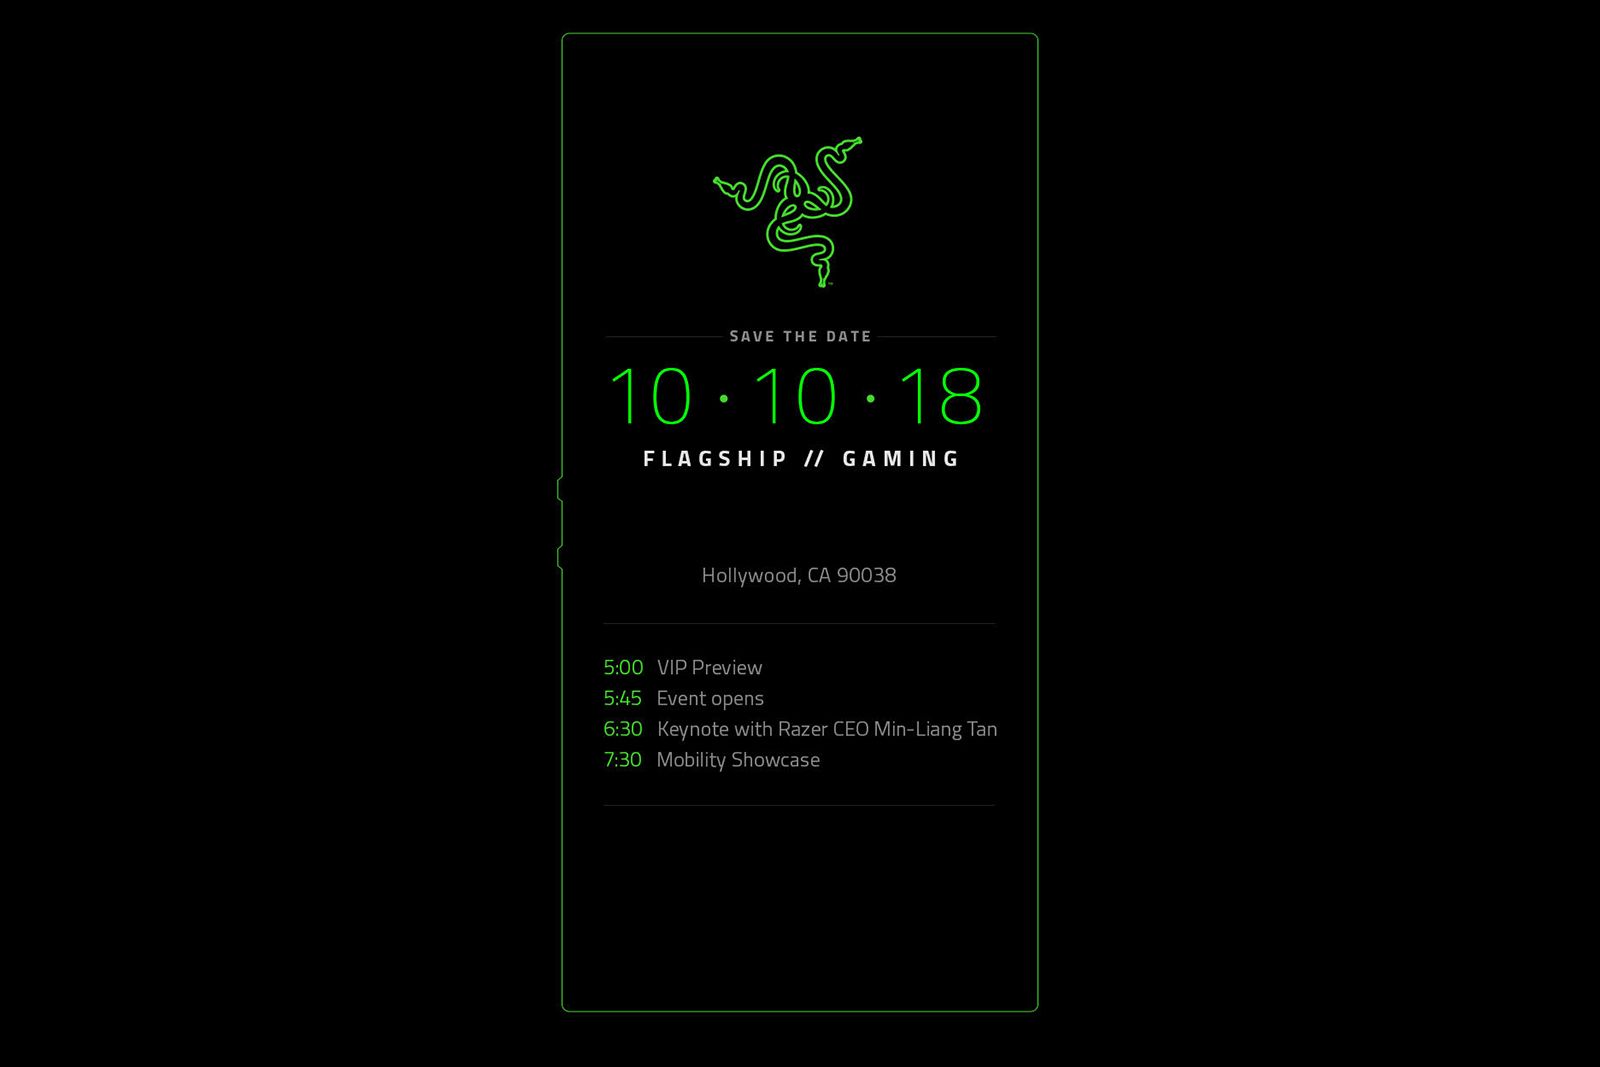 Razer send out invites to 10 October event likely for Razer Phone 2 image 1